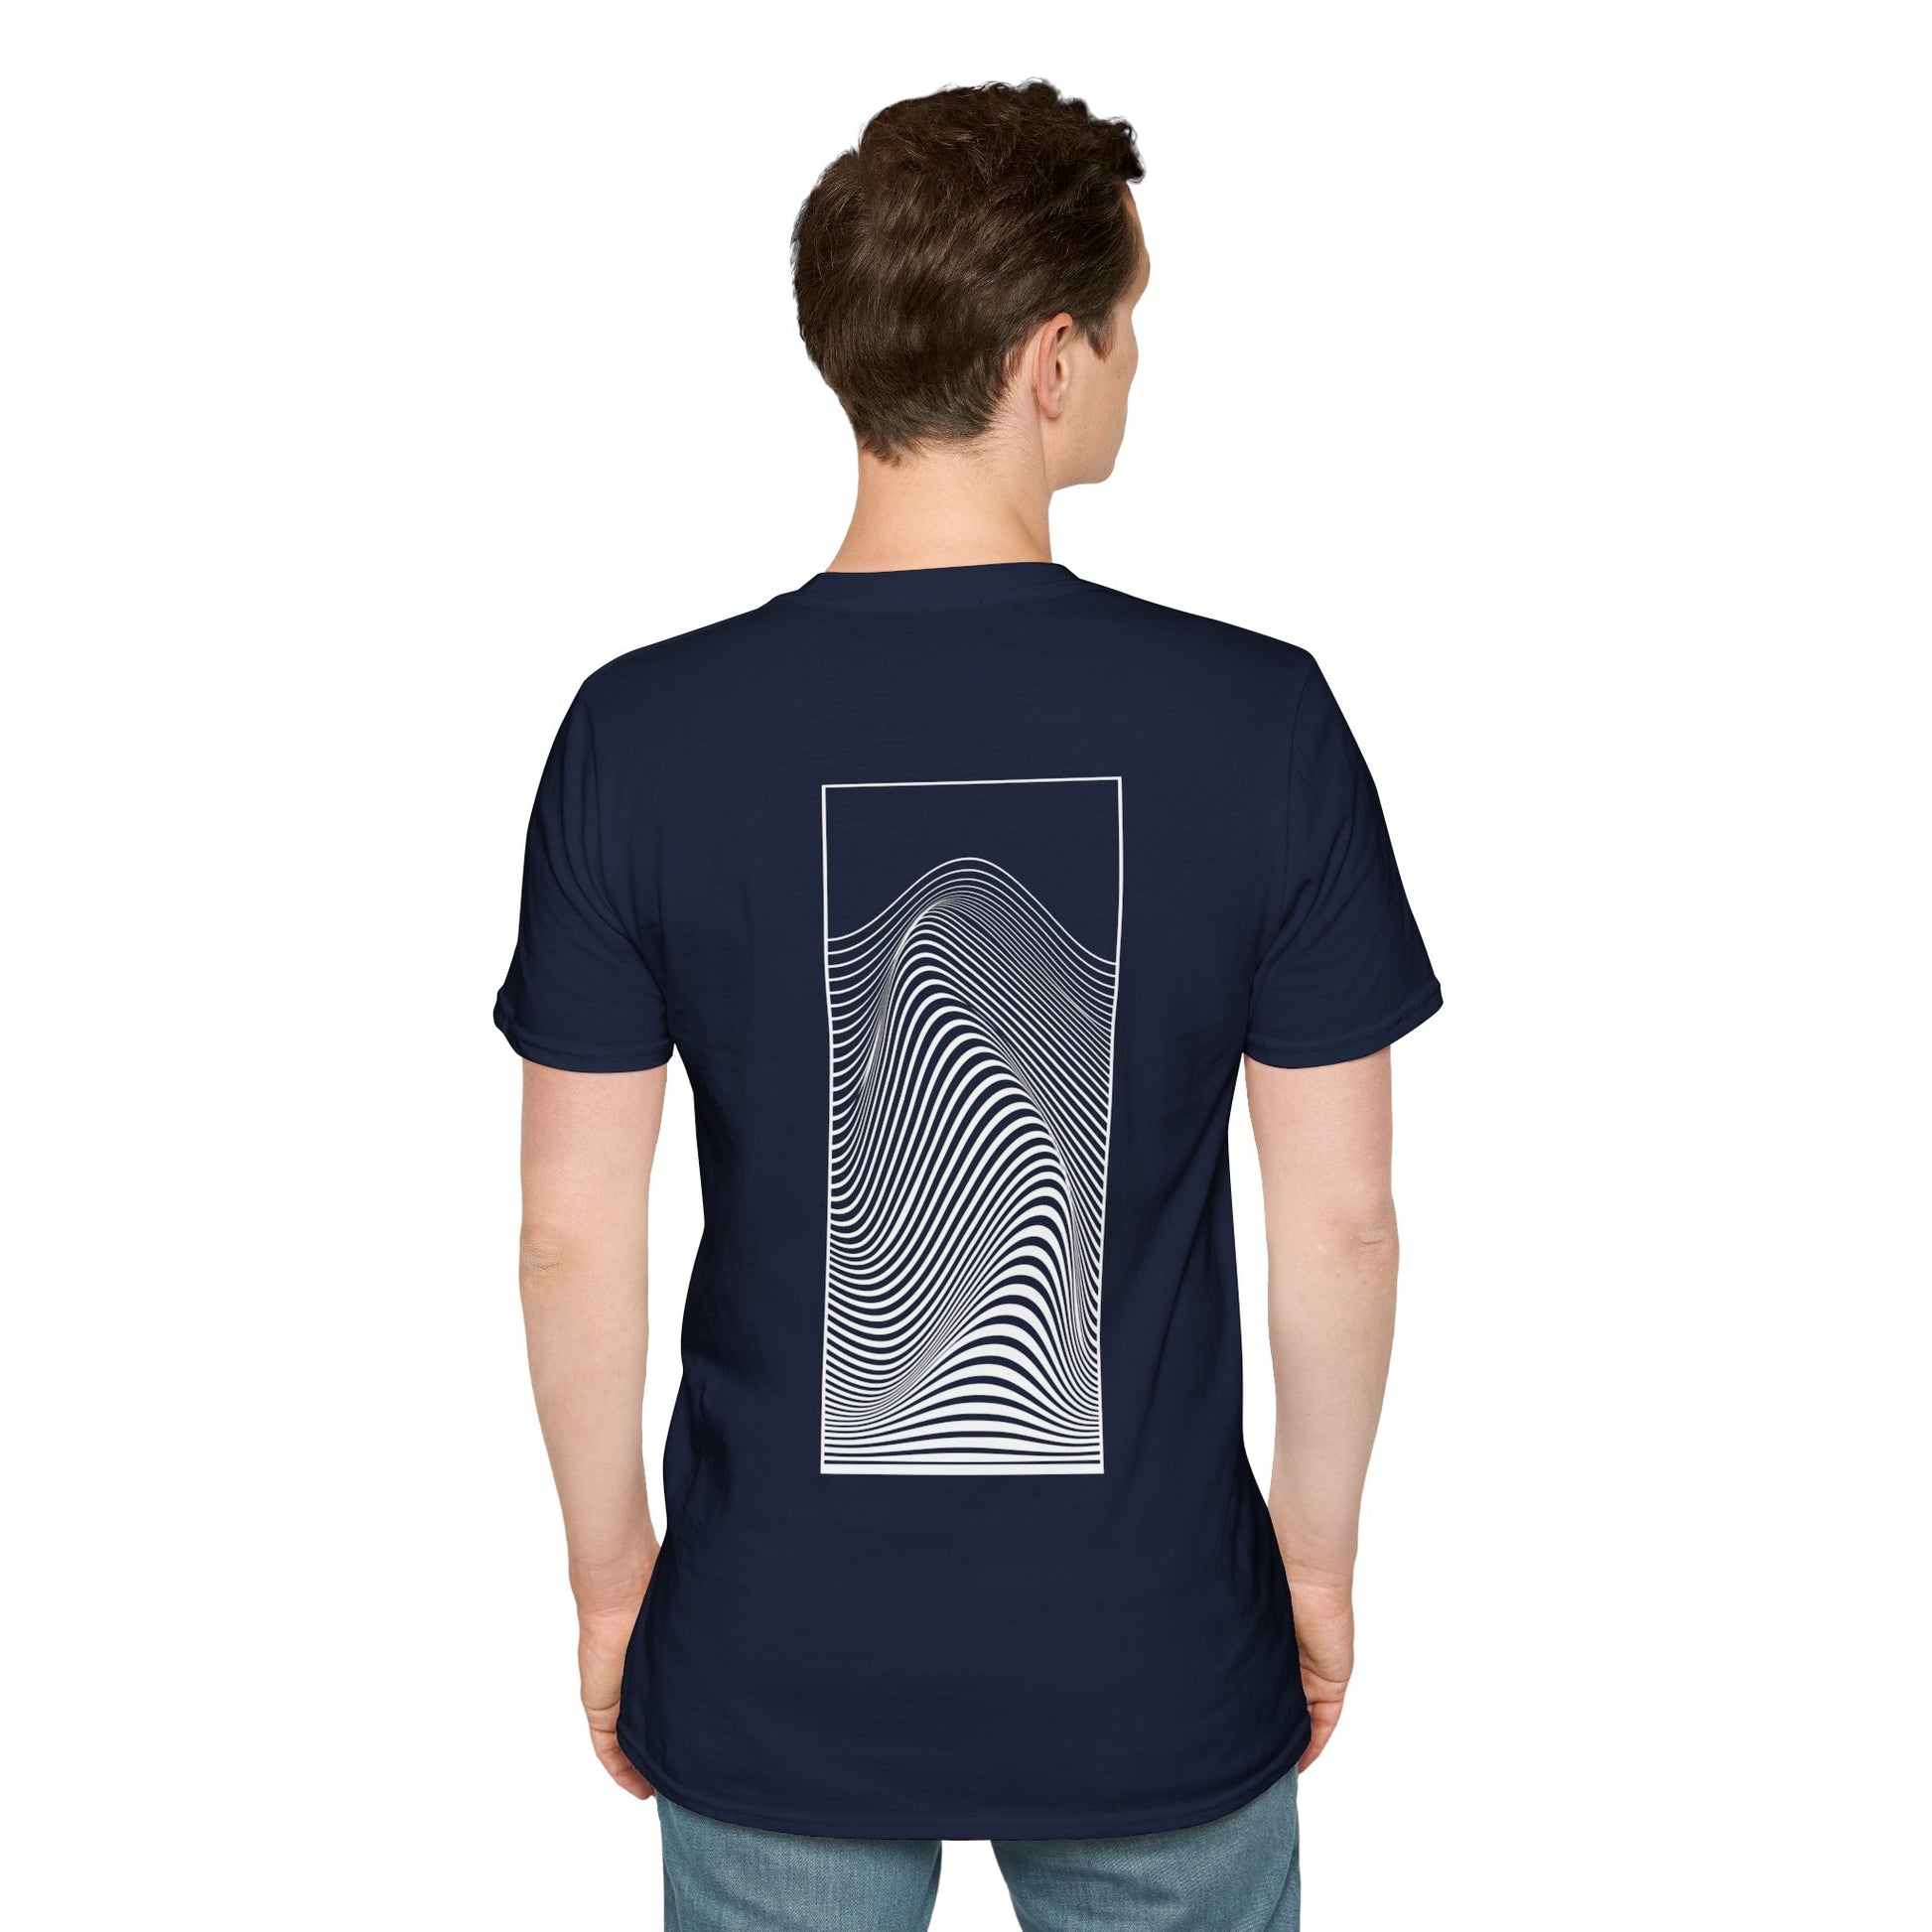 Navy T-shirt with a black and white optical illusion design of swirling patterns